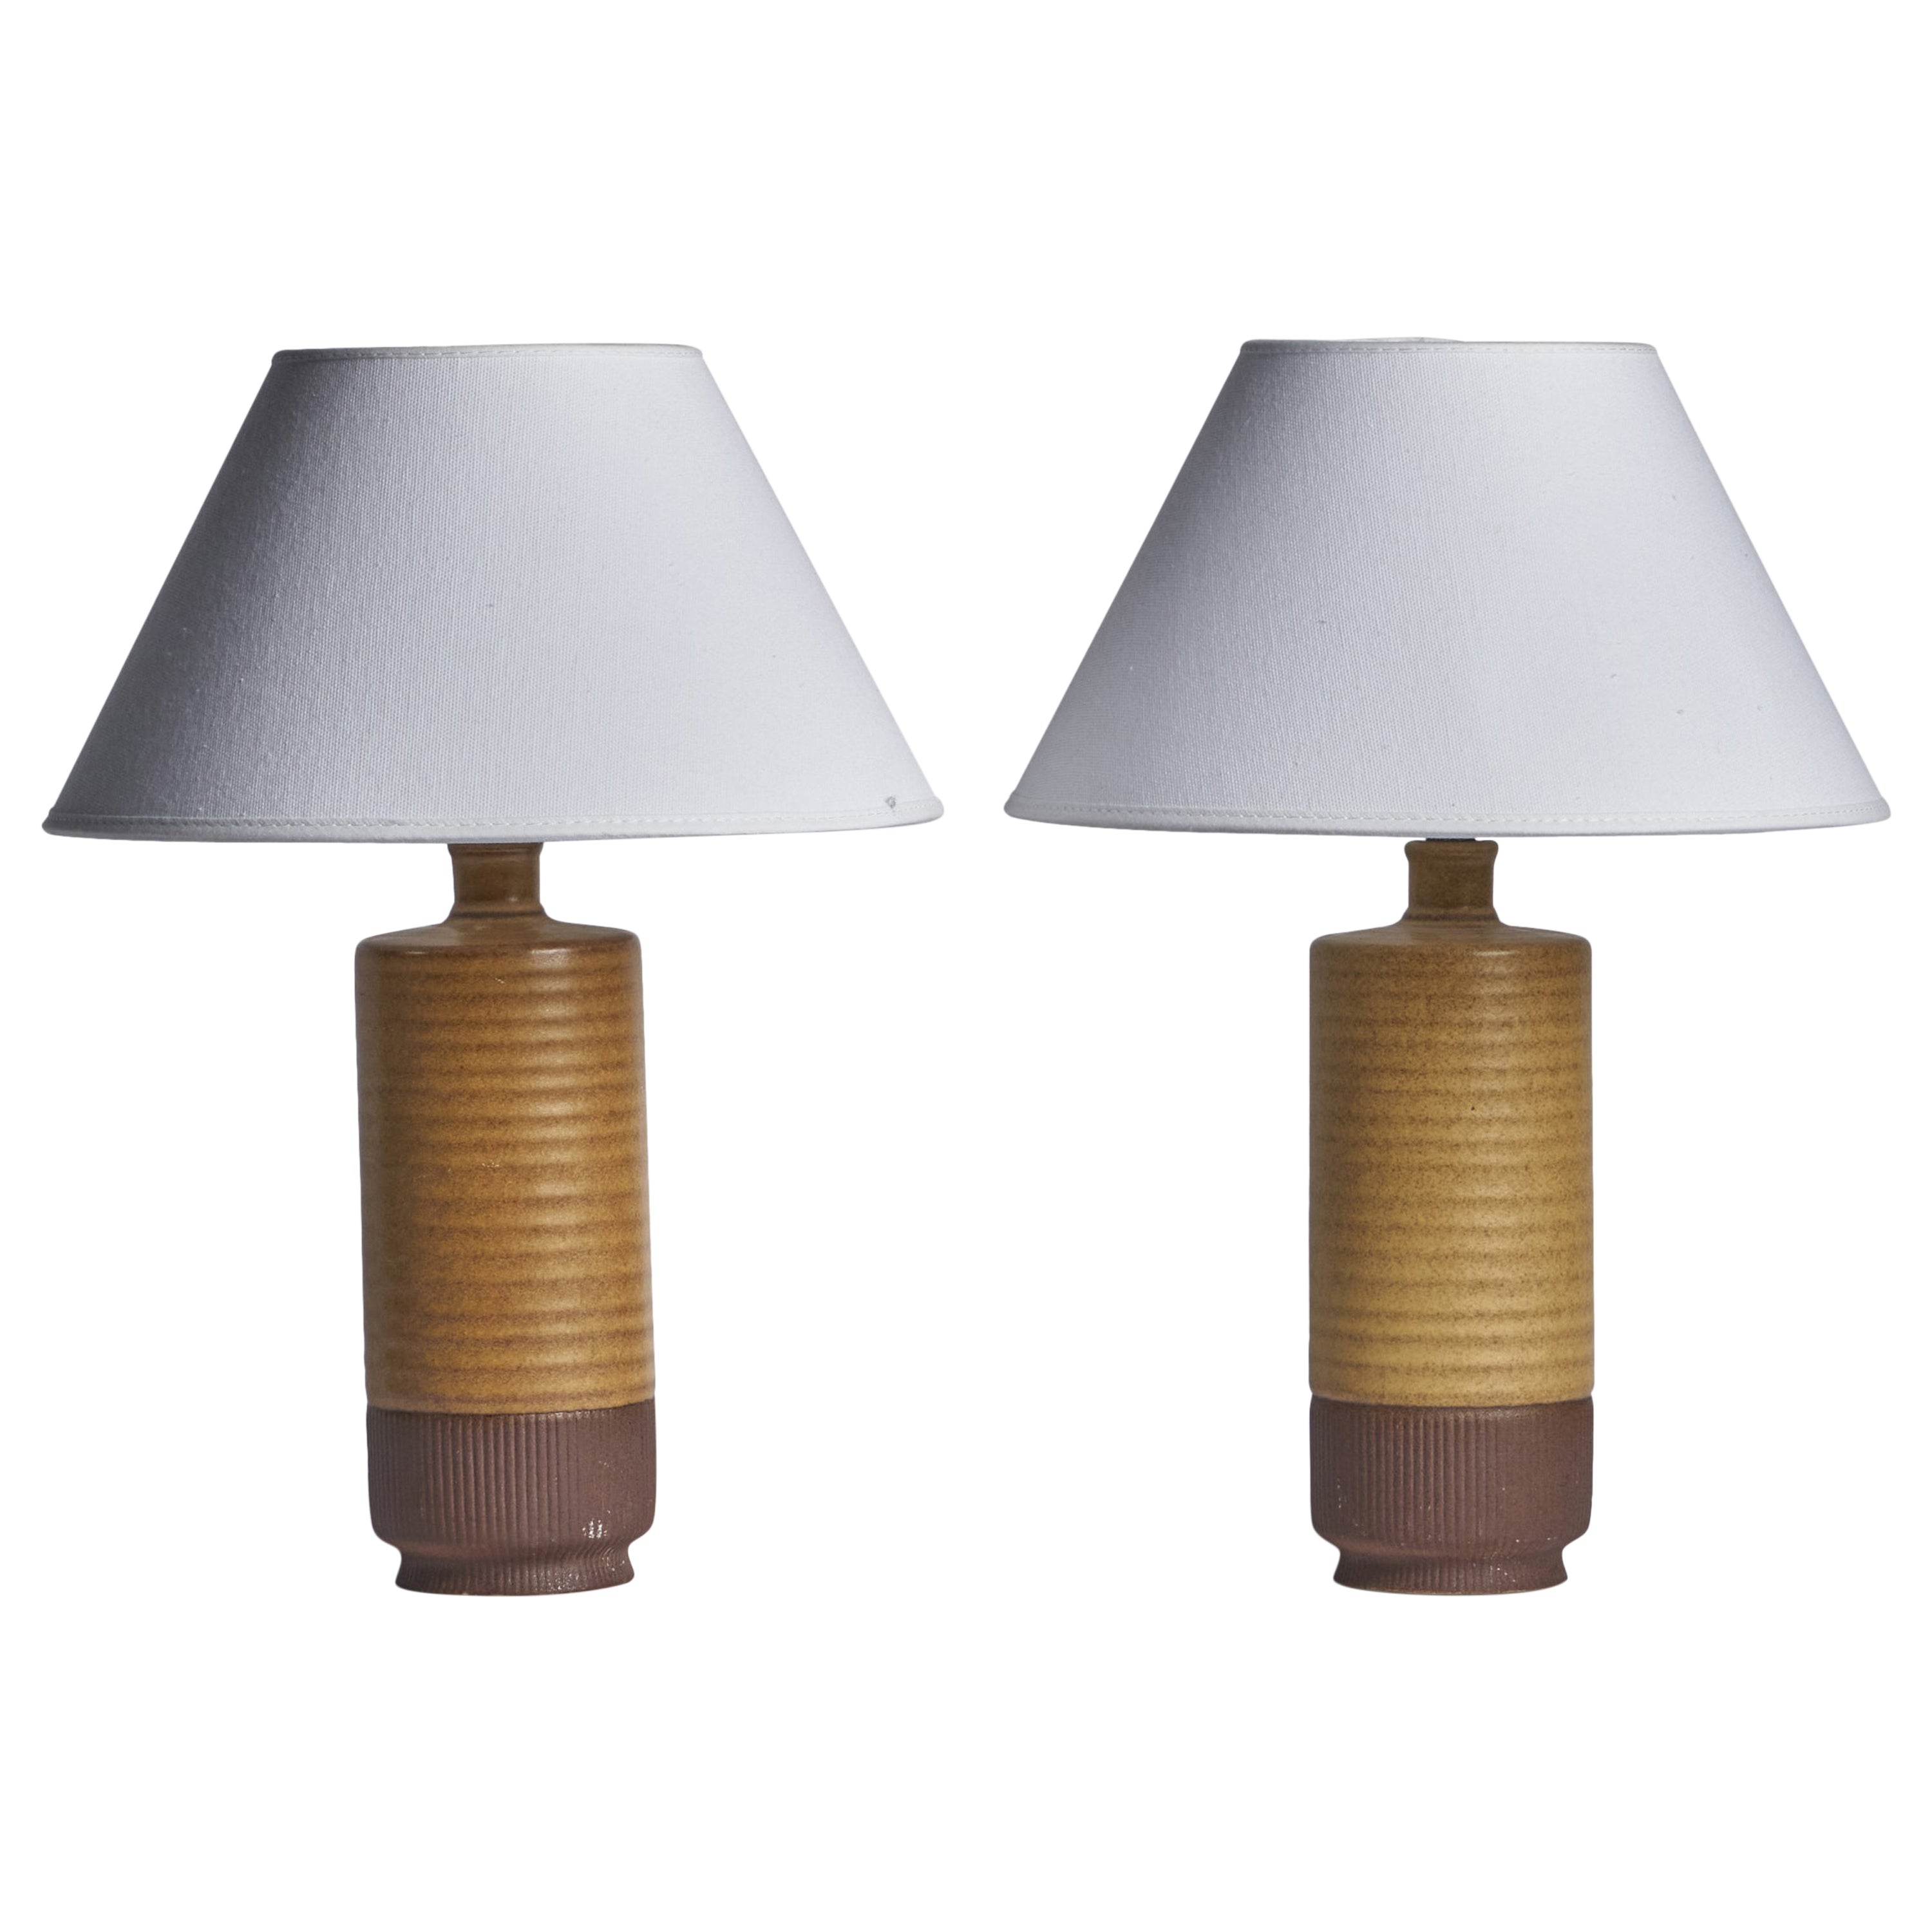 Gunnar Nylund, Table Lamps, Stoneware, Sweden, 1940s For Sale